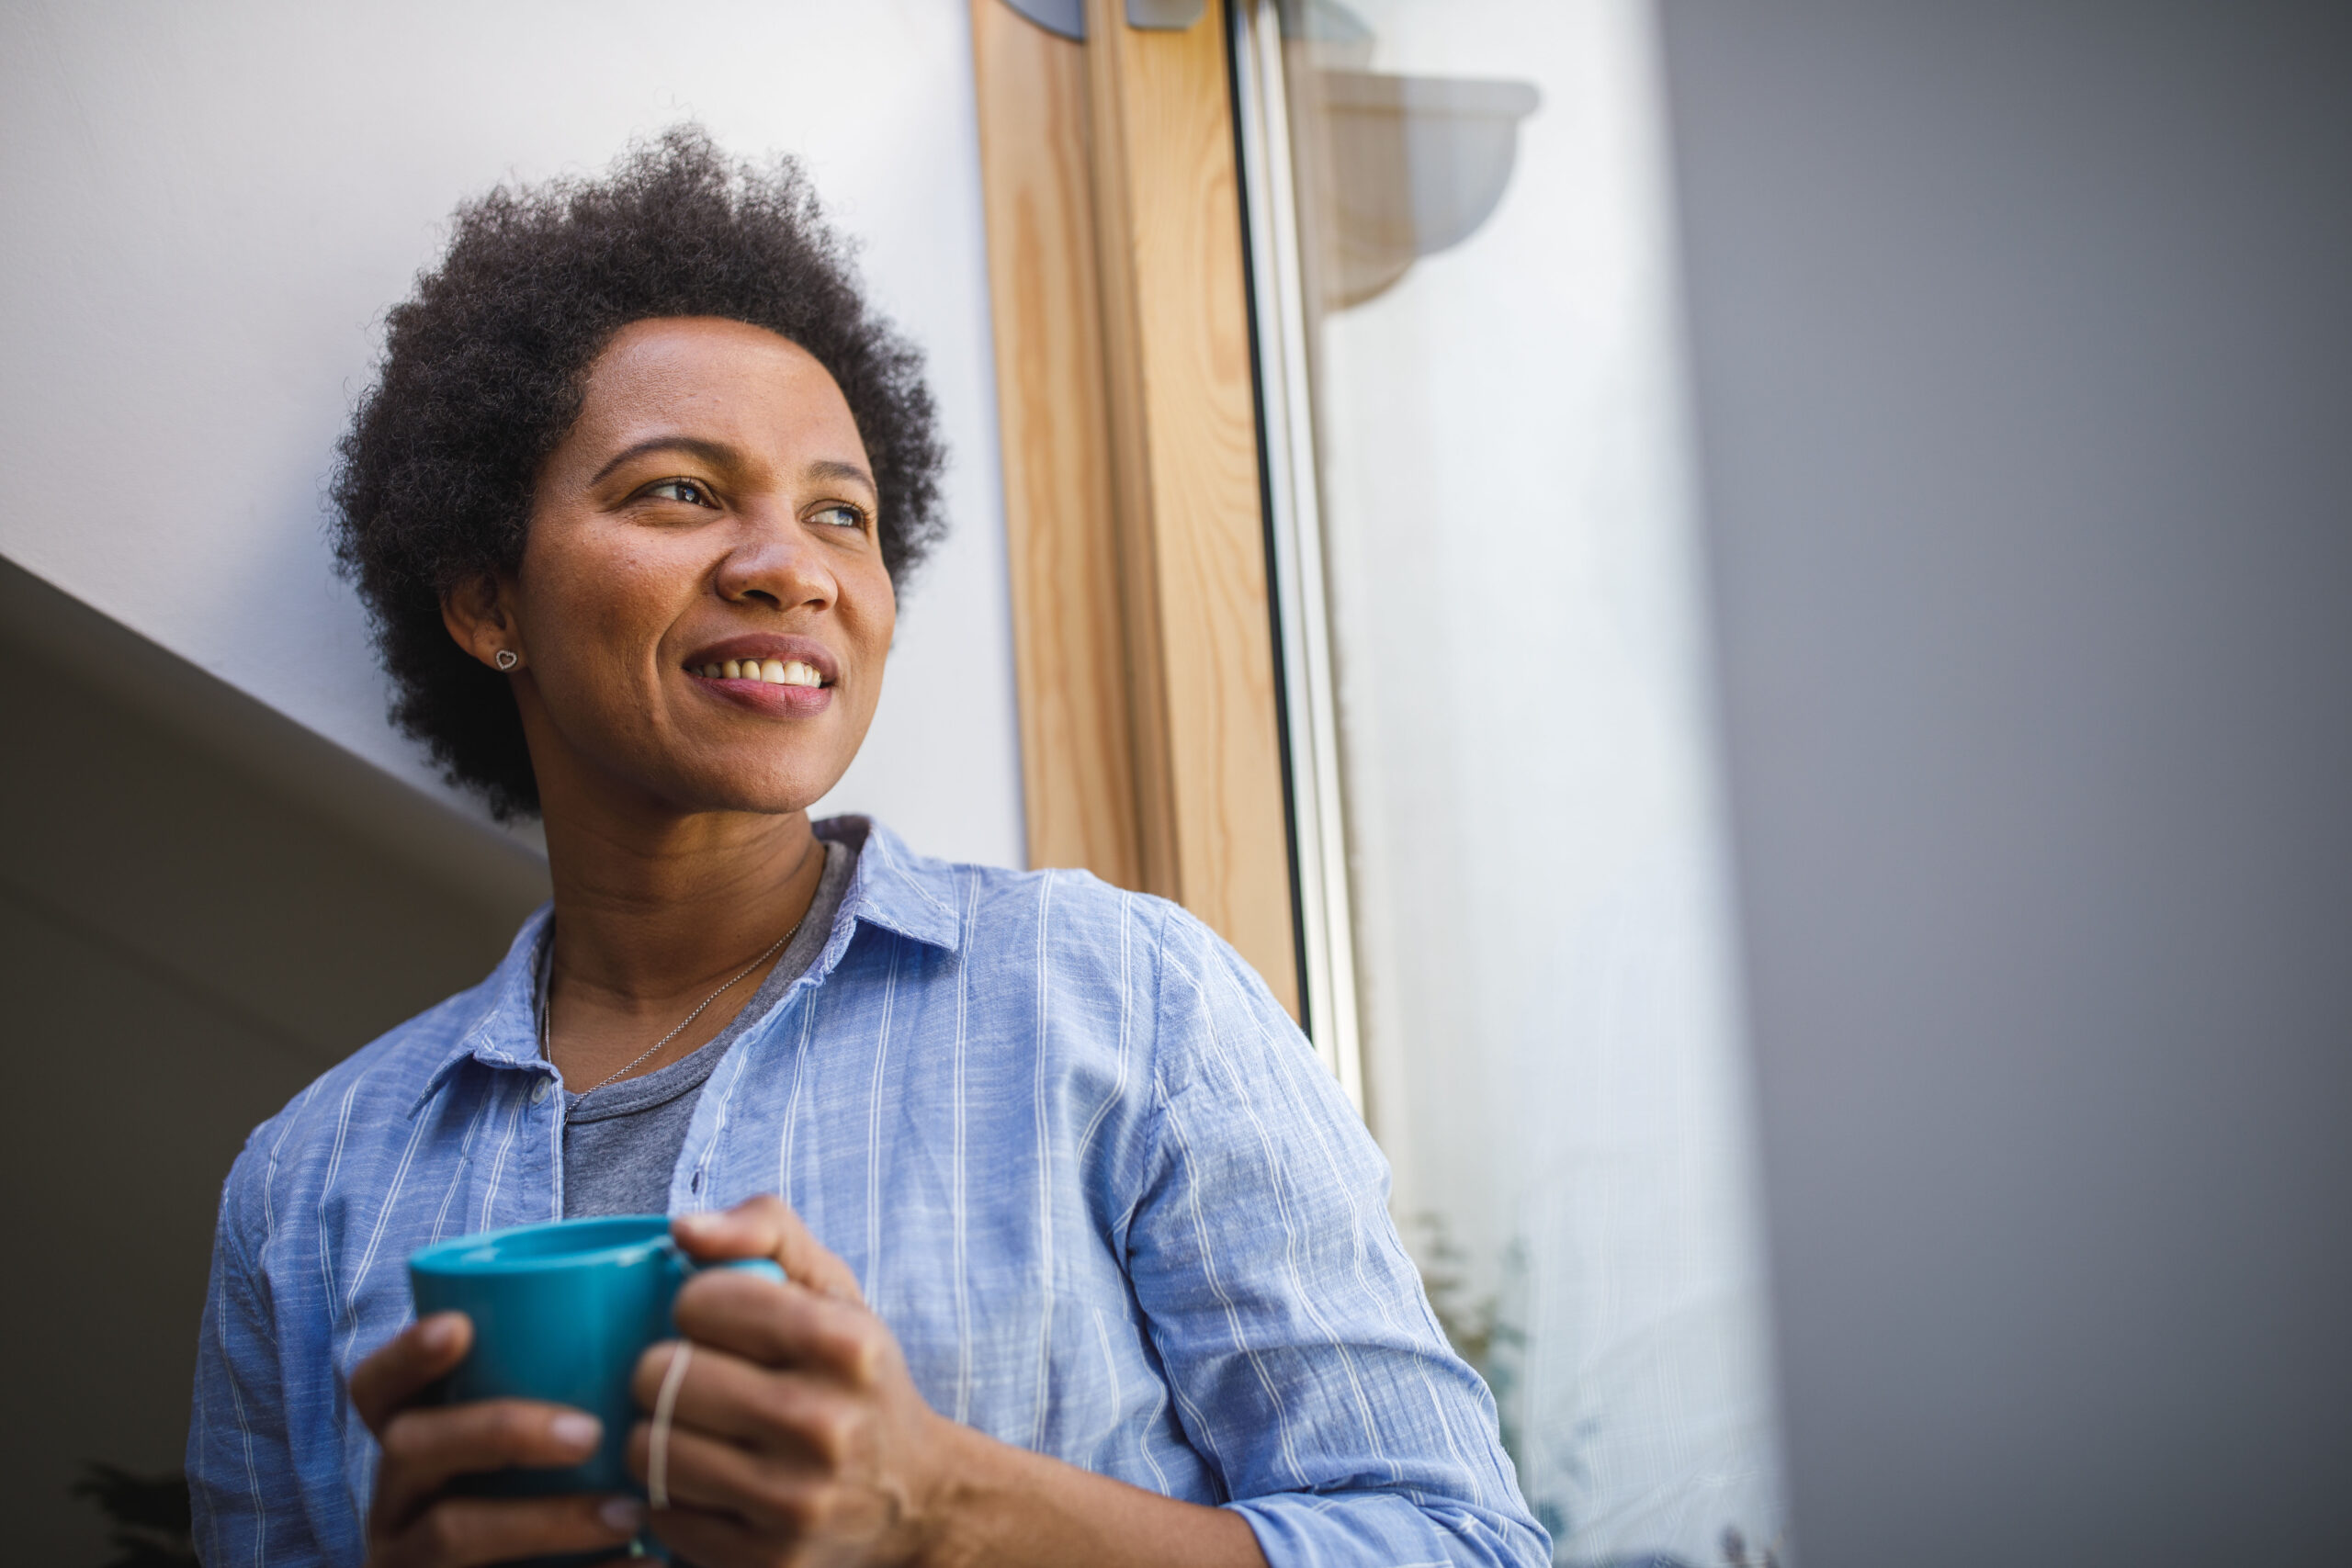 Cheerful mid adult woman enjoying a cup of tea and looking out the window